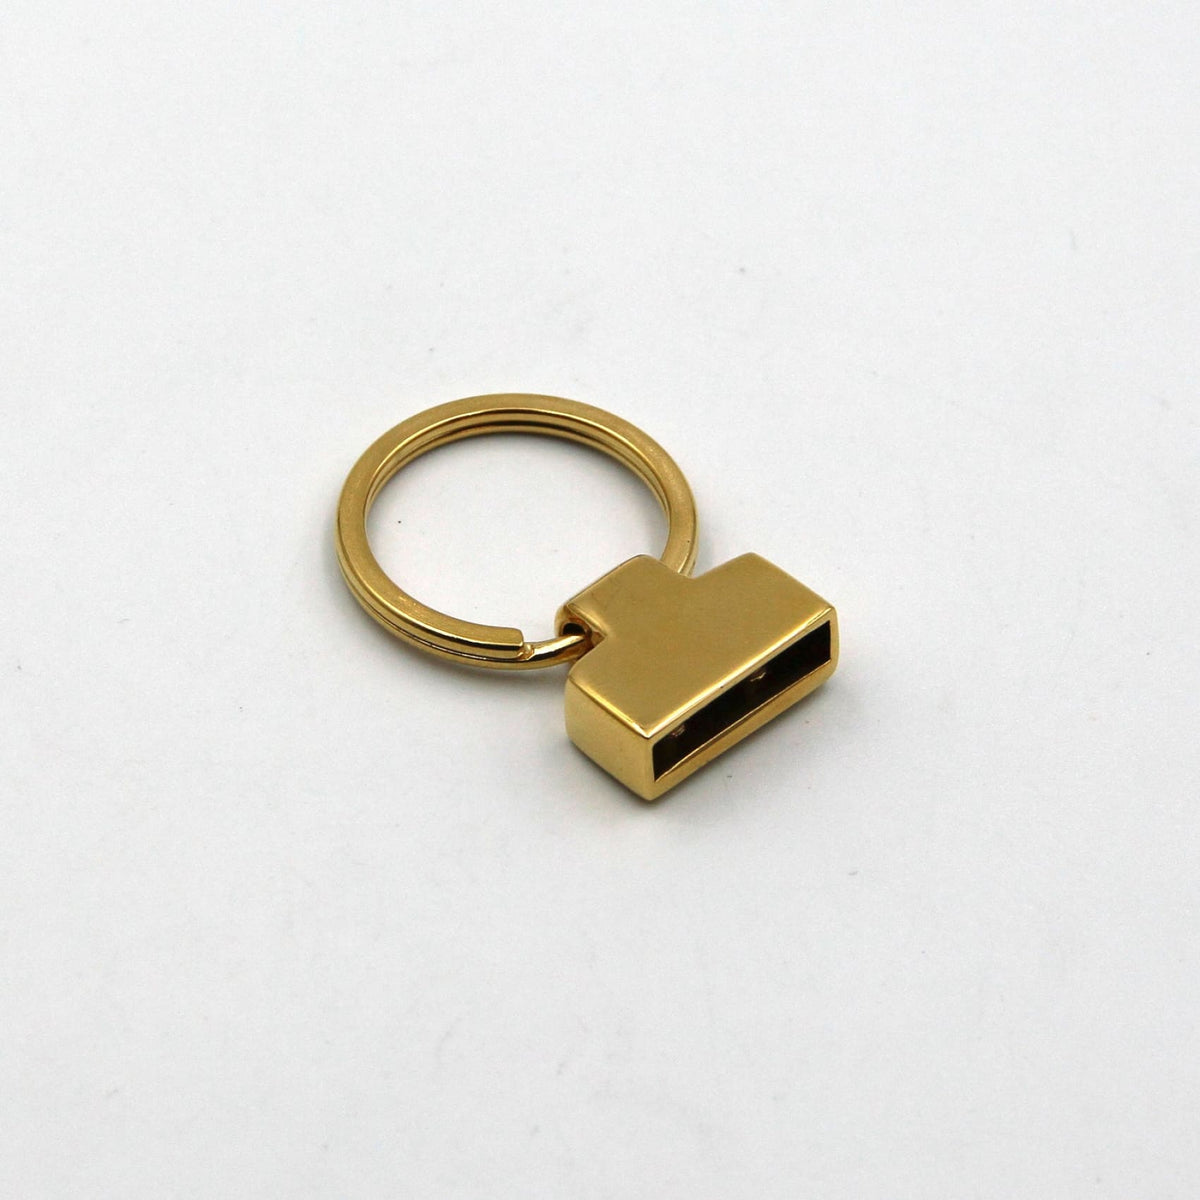 Metal Field Shop Premium Gold Leather Keychain Cover Leather Brass Key Holder Head 10pcs